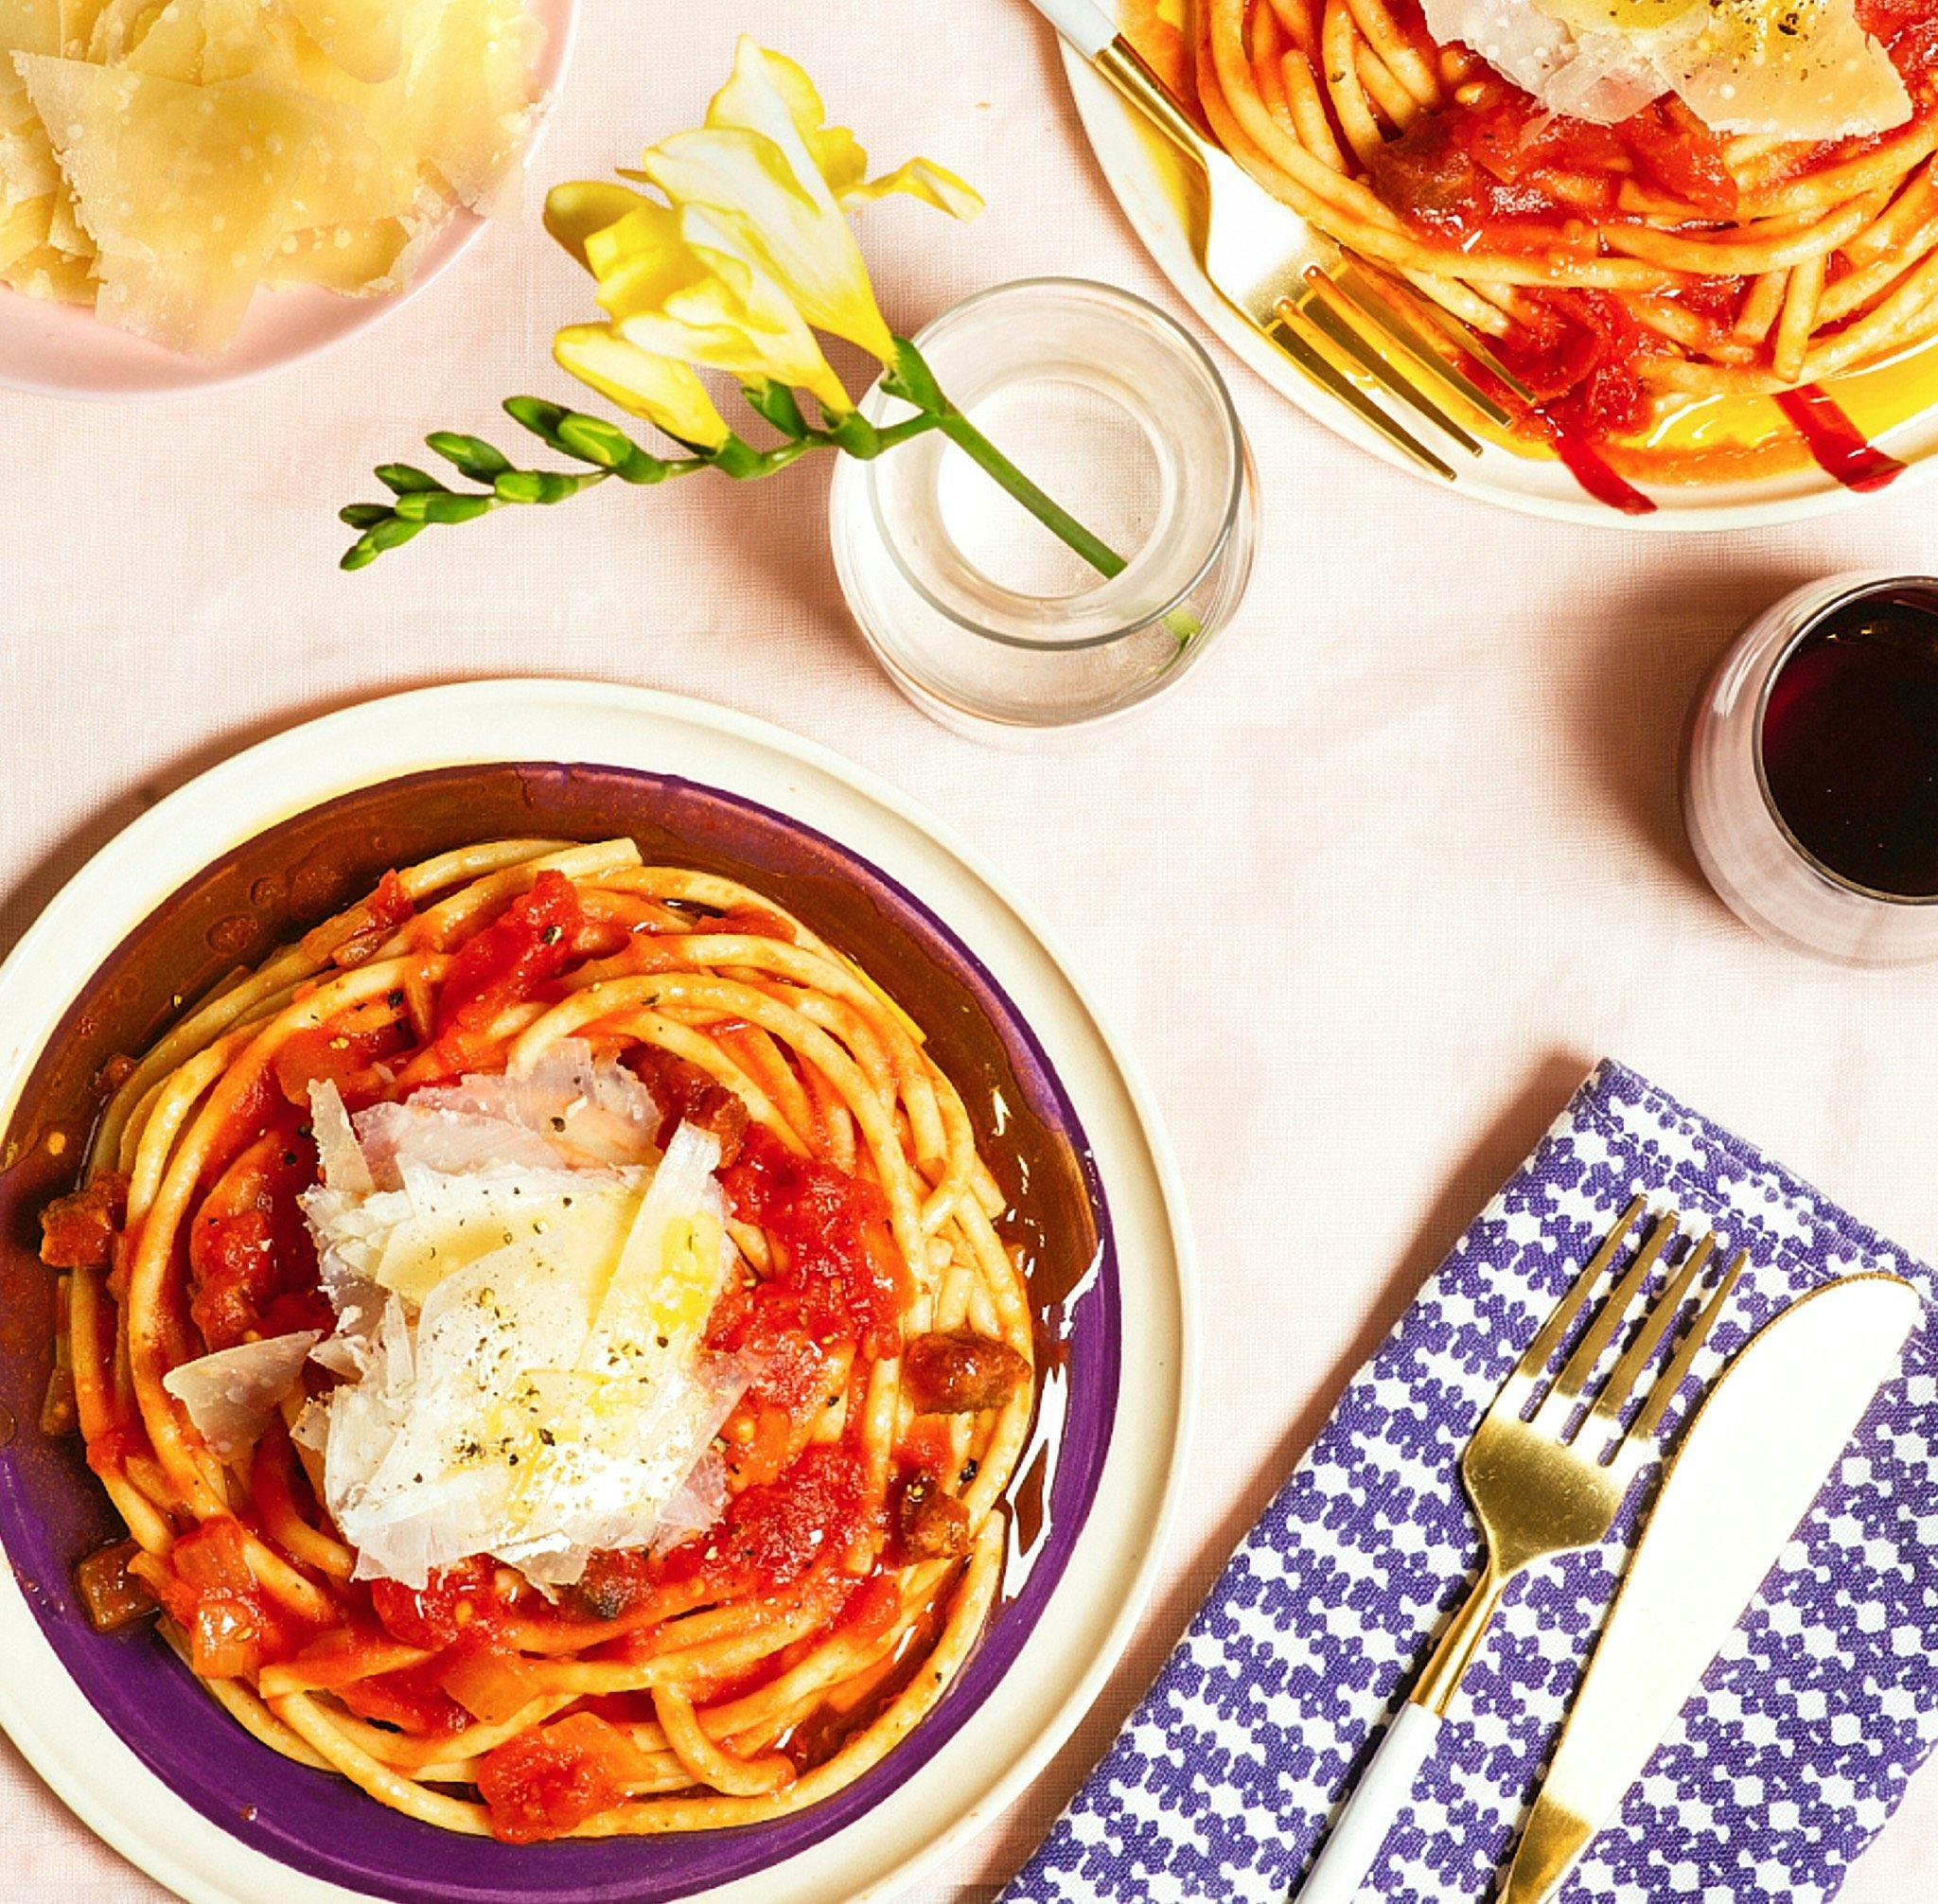 a table setting with 2 plates of spaghetti with red sauce and shaved cheese on top